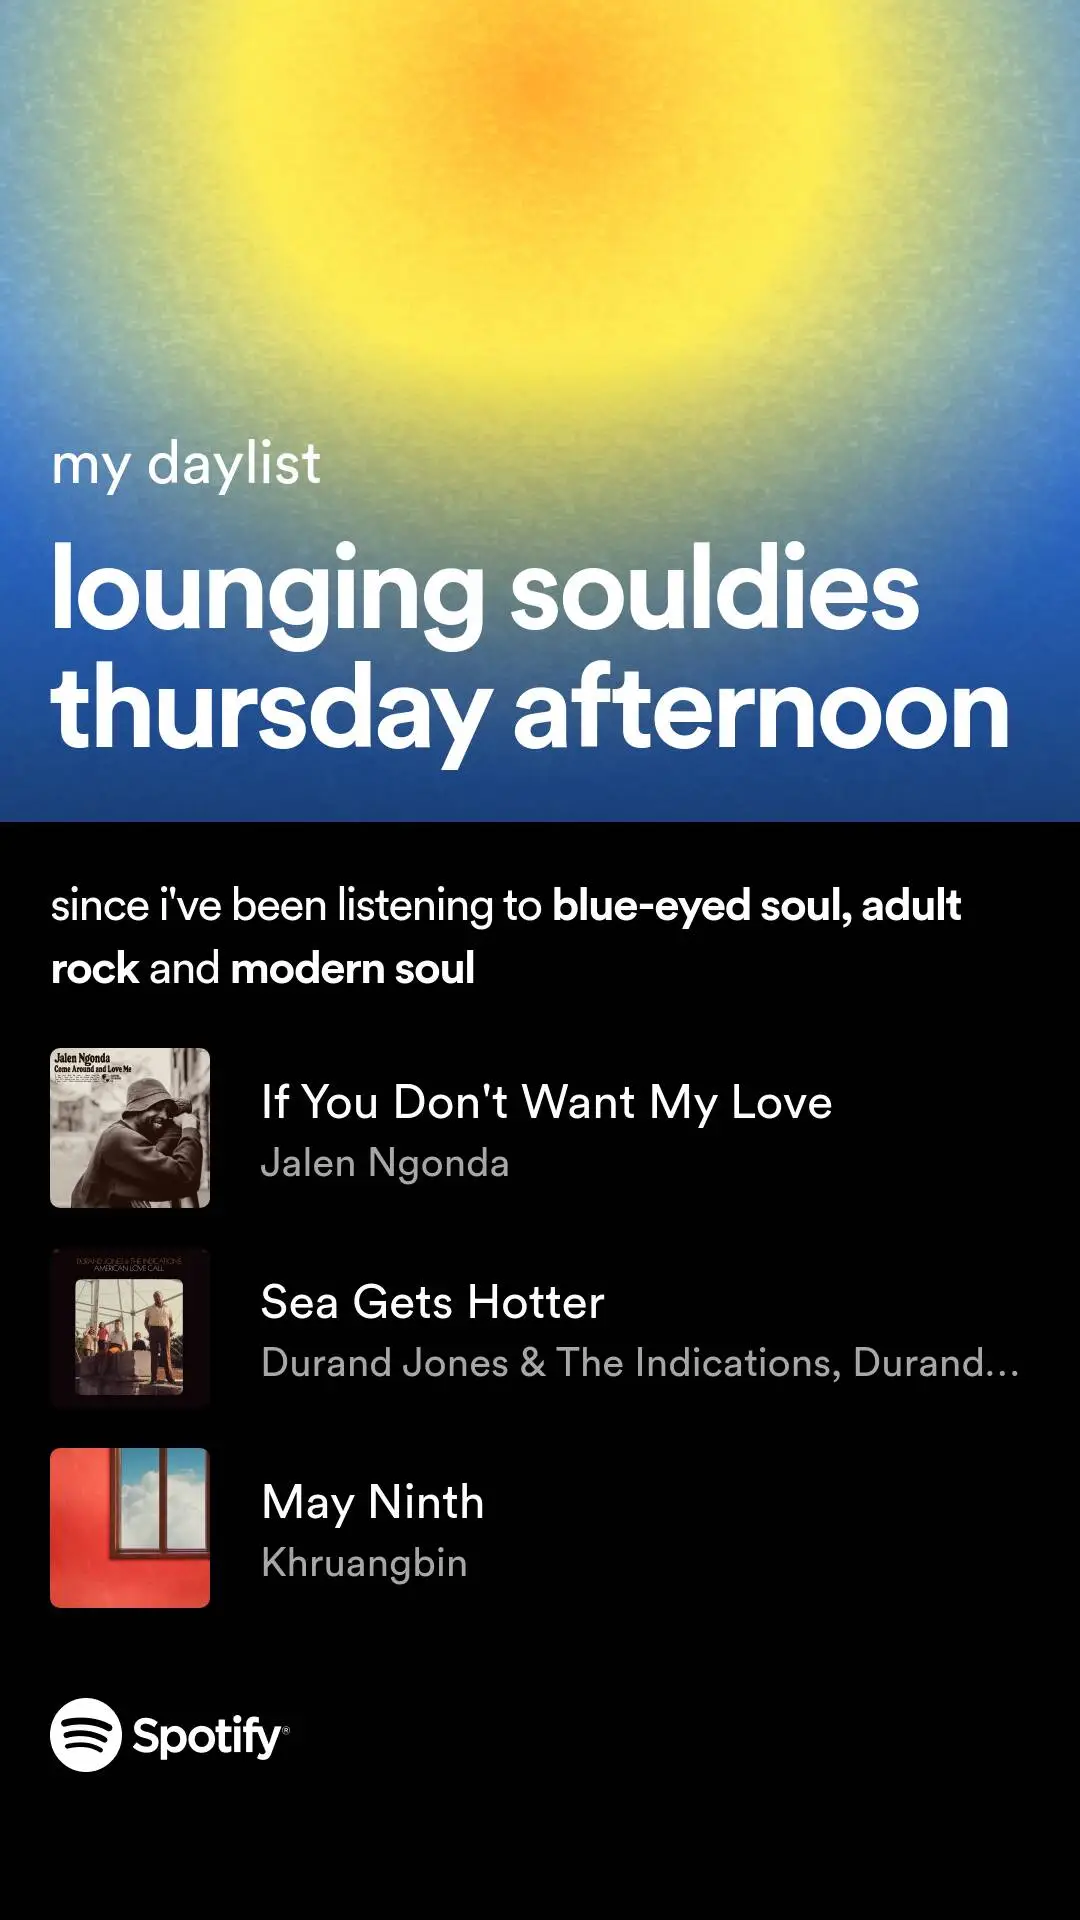 Spotify daylists spearhead retention and speak to the soul